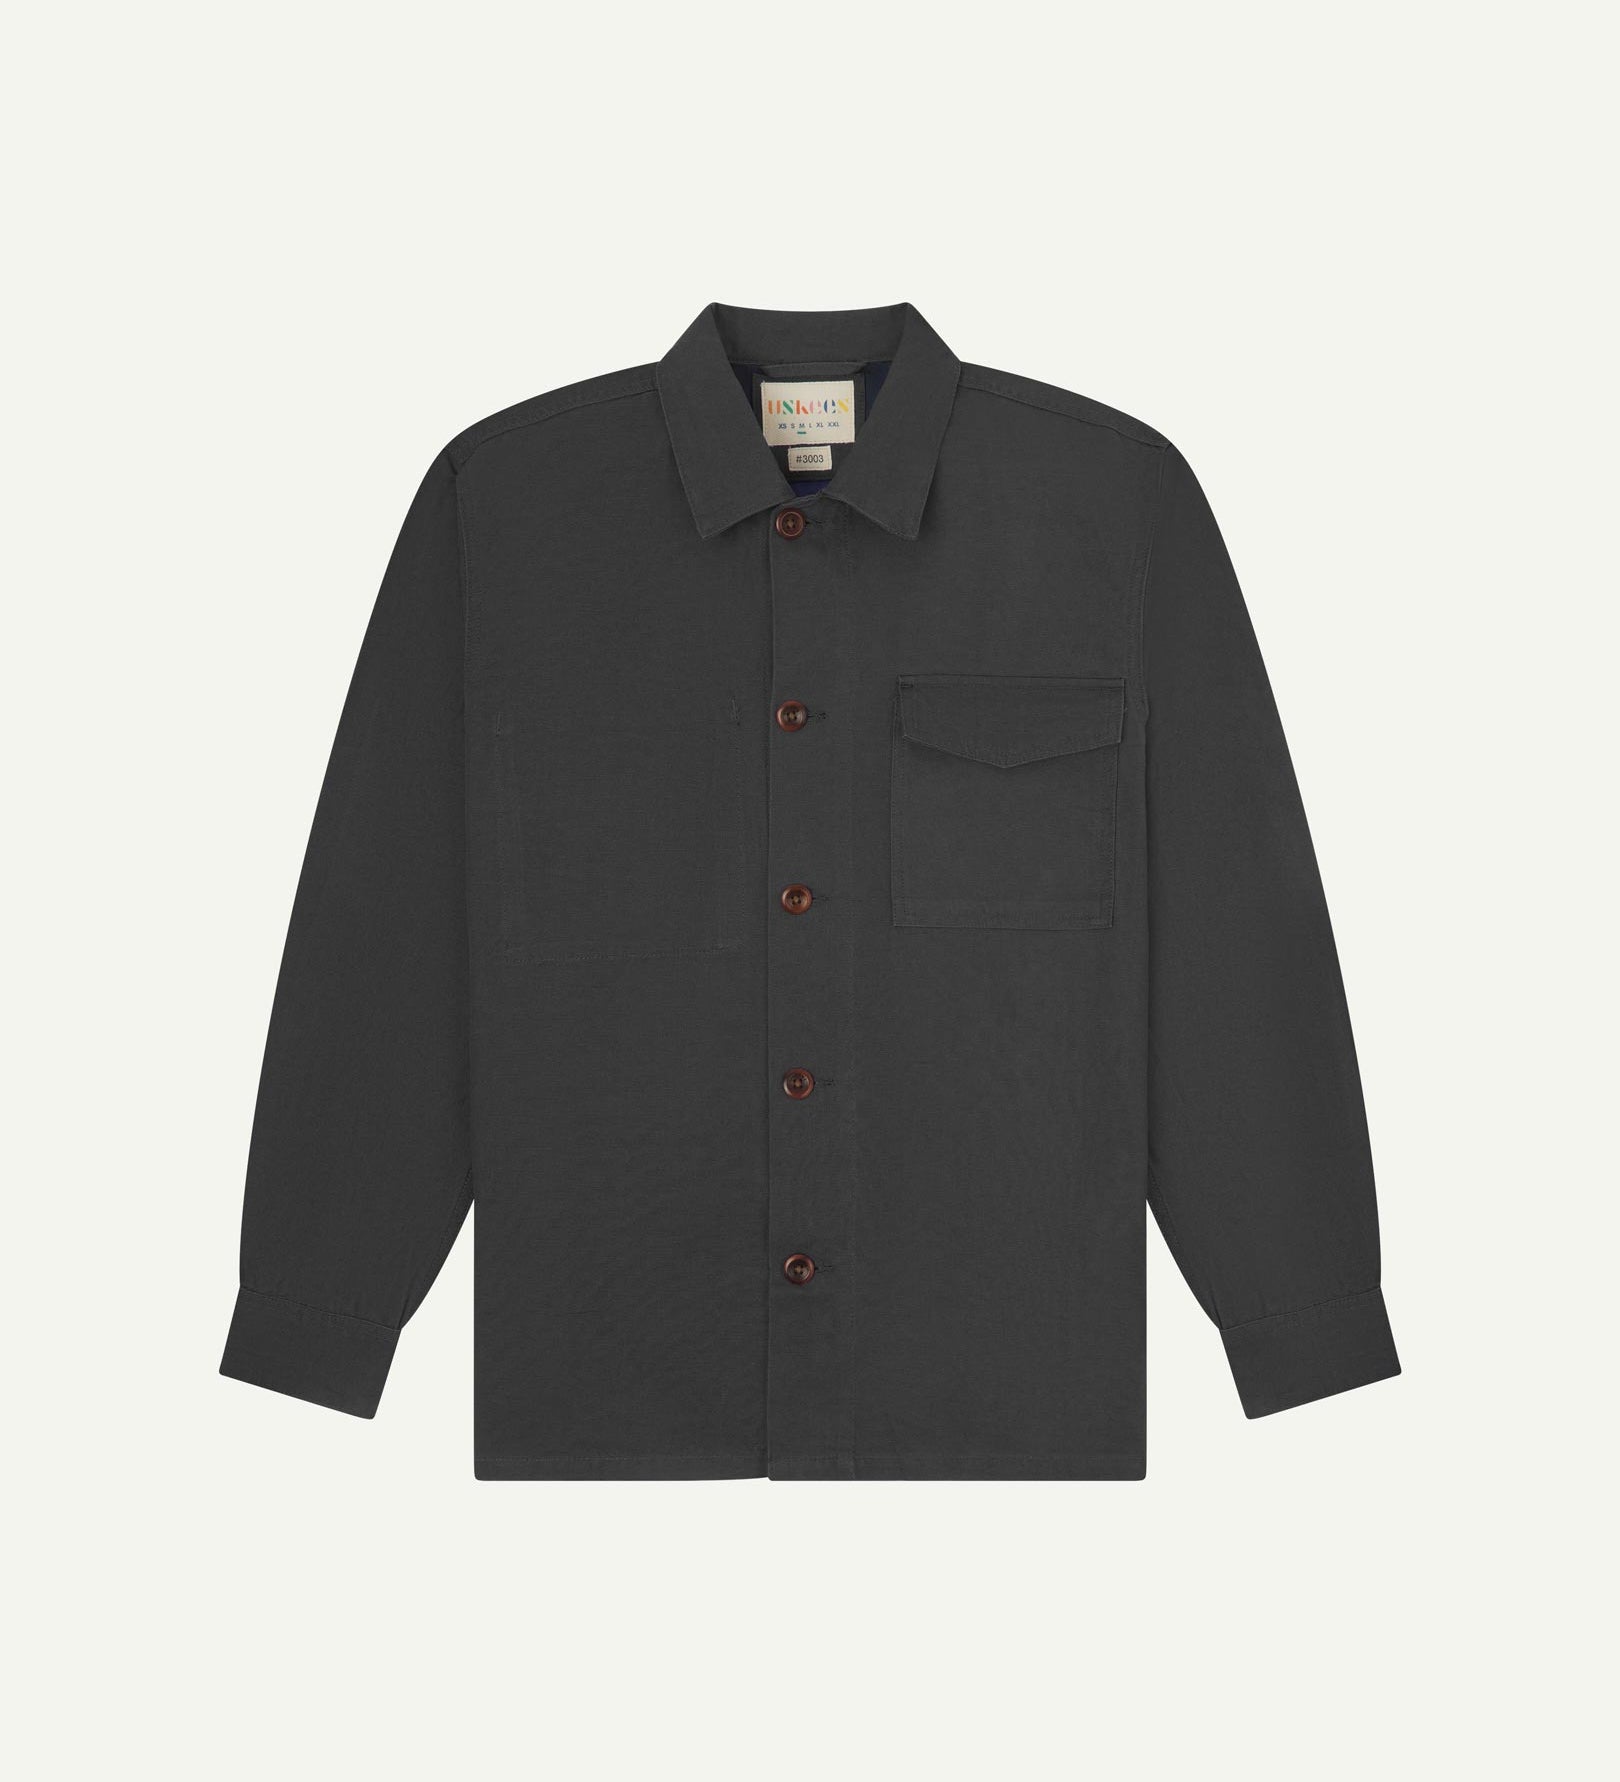 Charcoal buttoned organic cotton overshirt from Uskees with clear view of chest pocket and Uskees branding label.